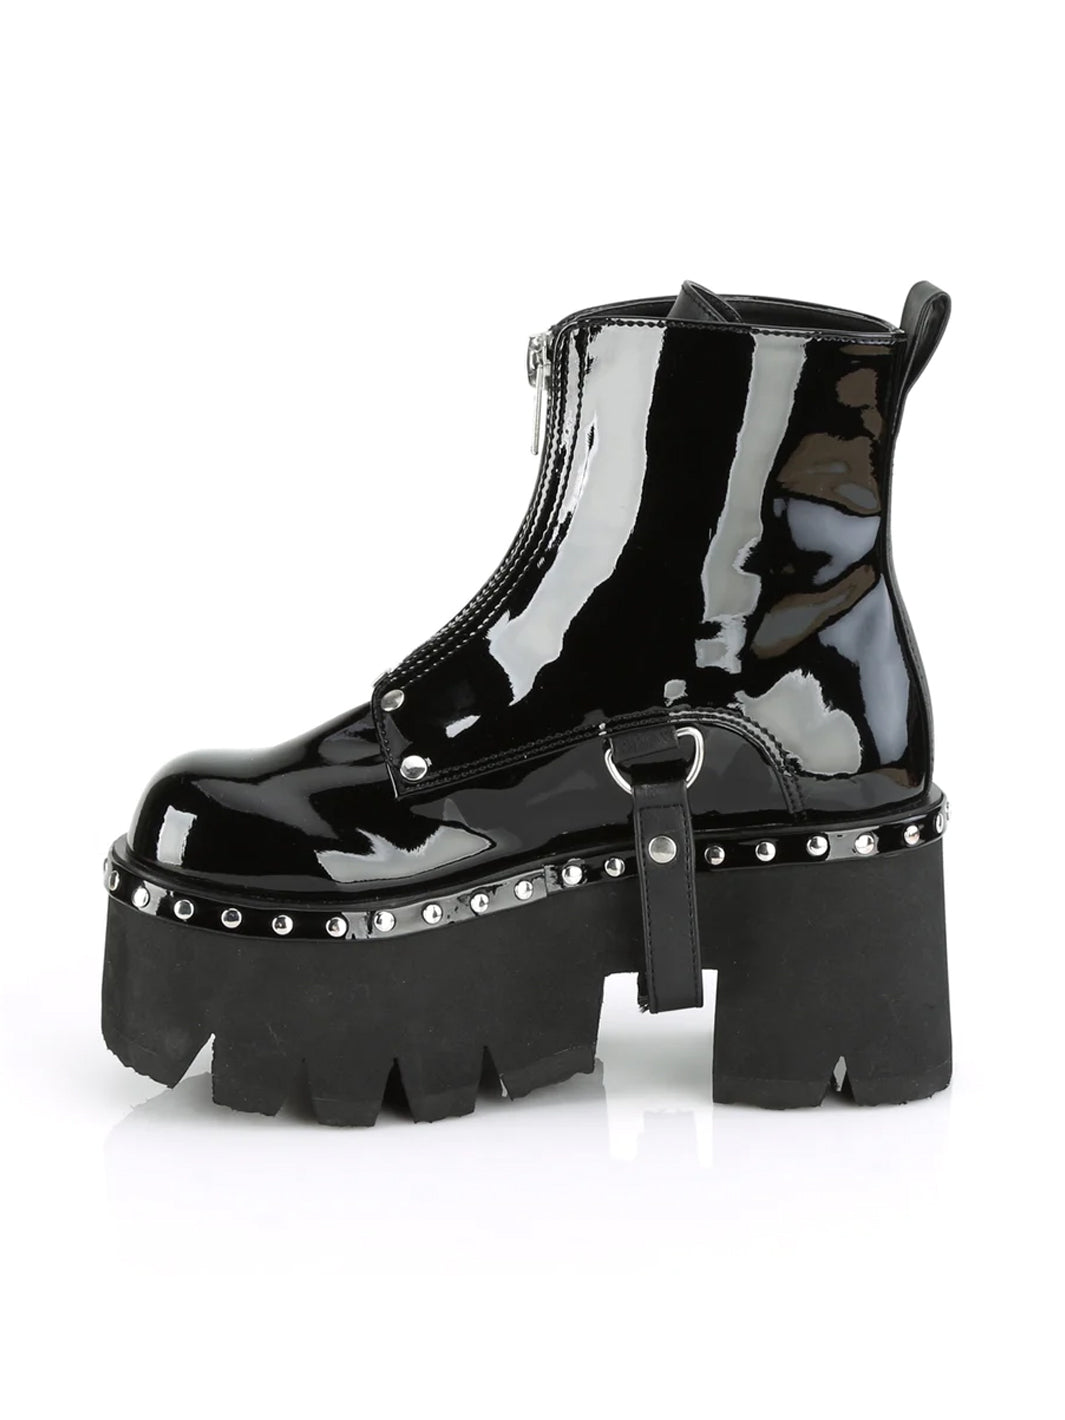 DEMONIA ASHES-100 BOOTS - BLACK PATENT  ✰ PRE ORDER ✰